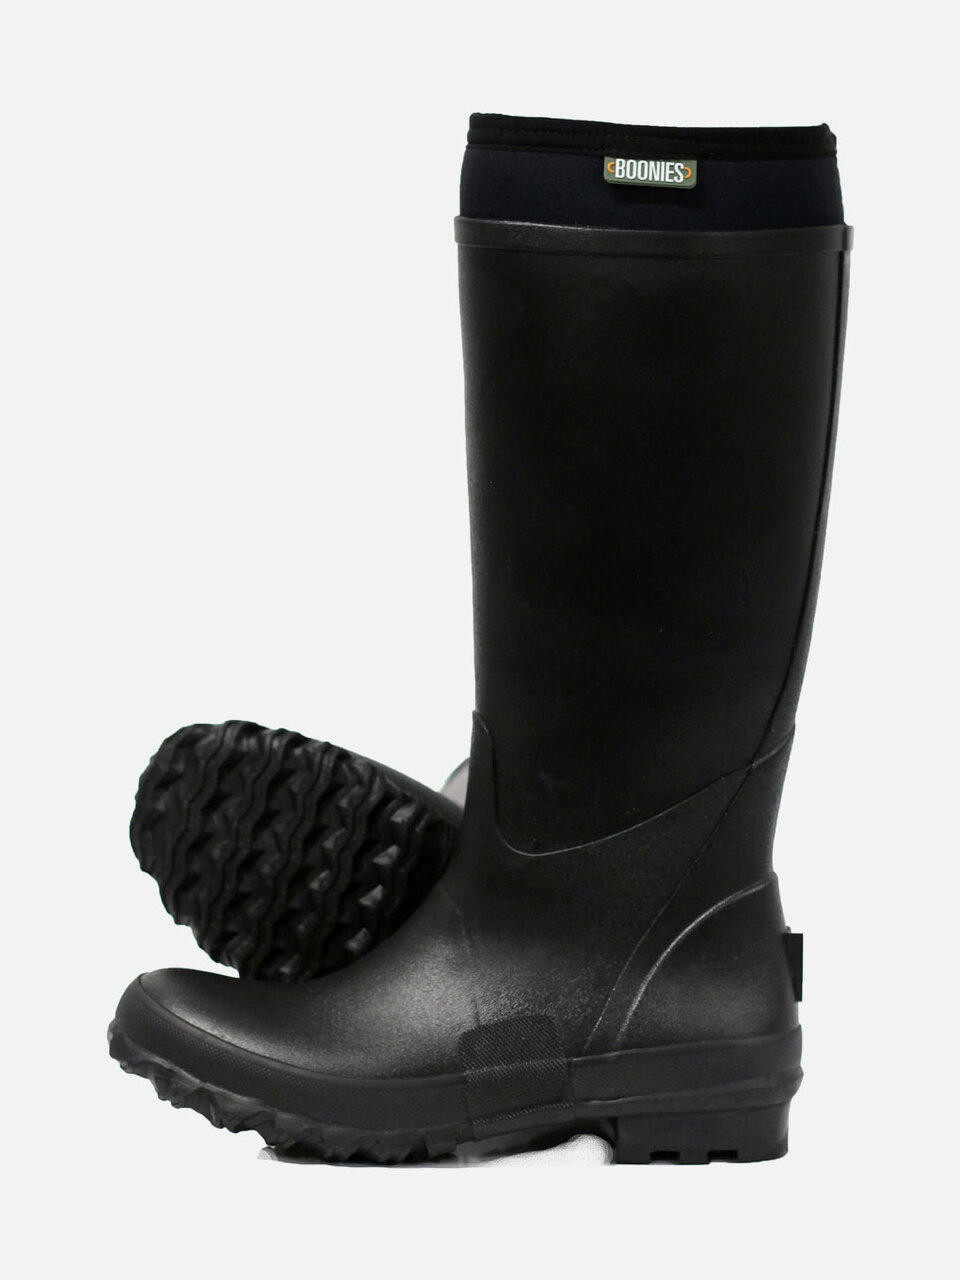 Boonies Womens Gumboots Rosie Tall - Black